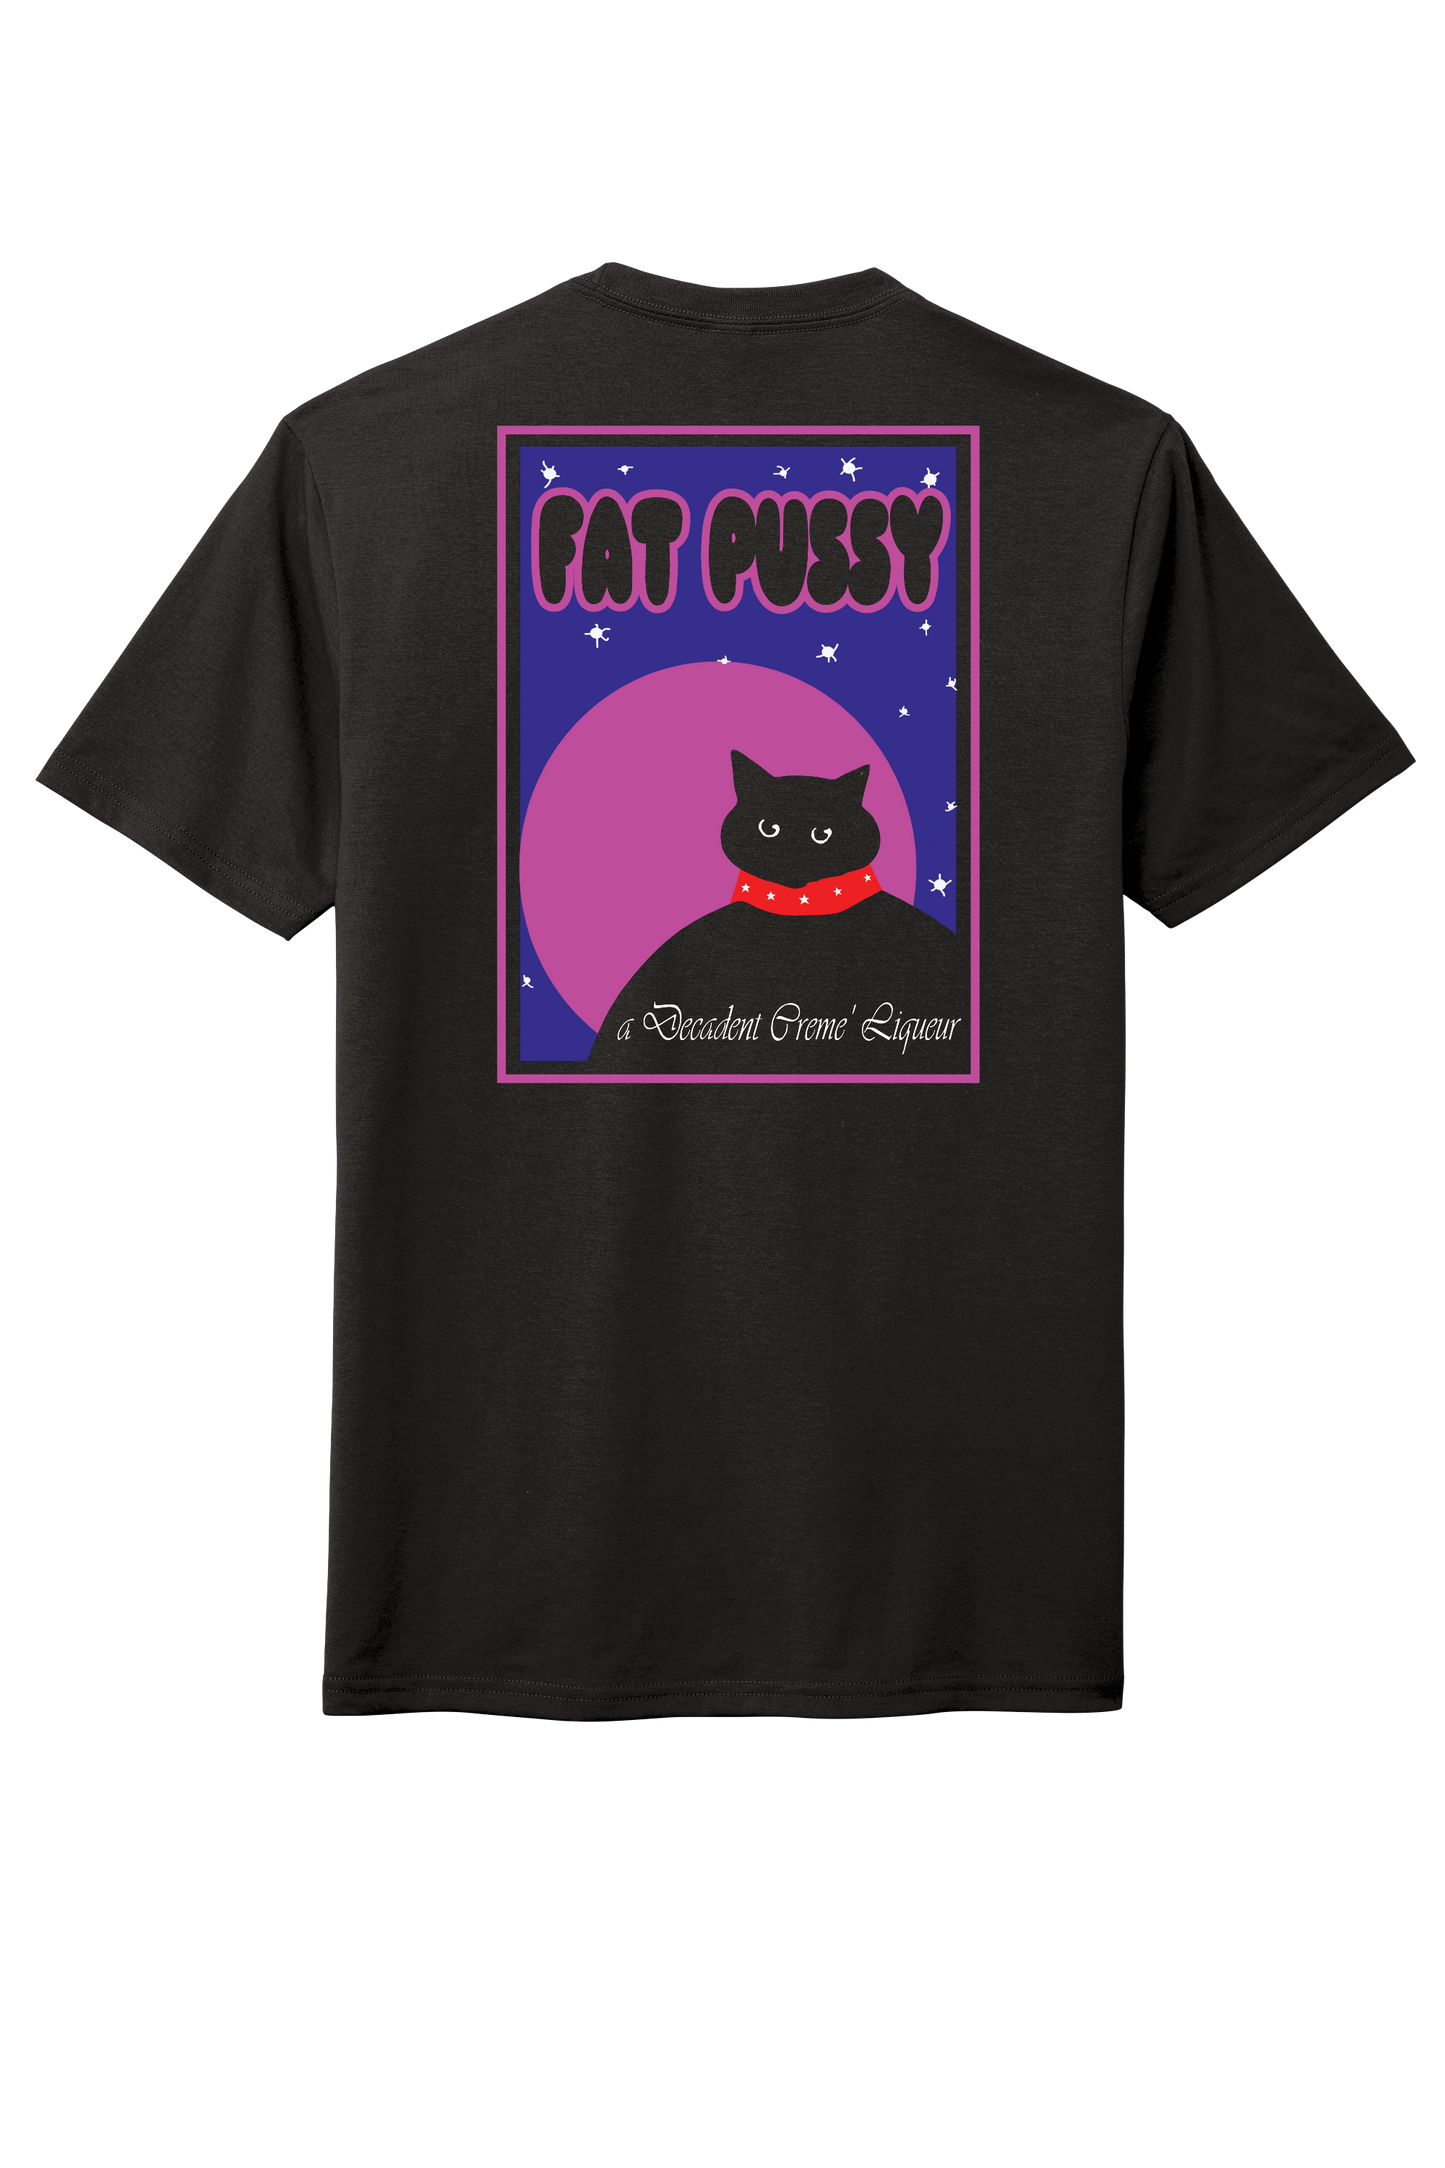 Big Titty Rum Fat Pussy T shirt - Logo small on front and large Fat Pussy logo on back